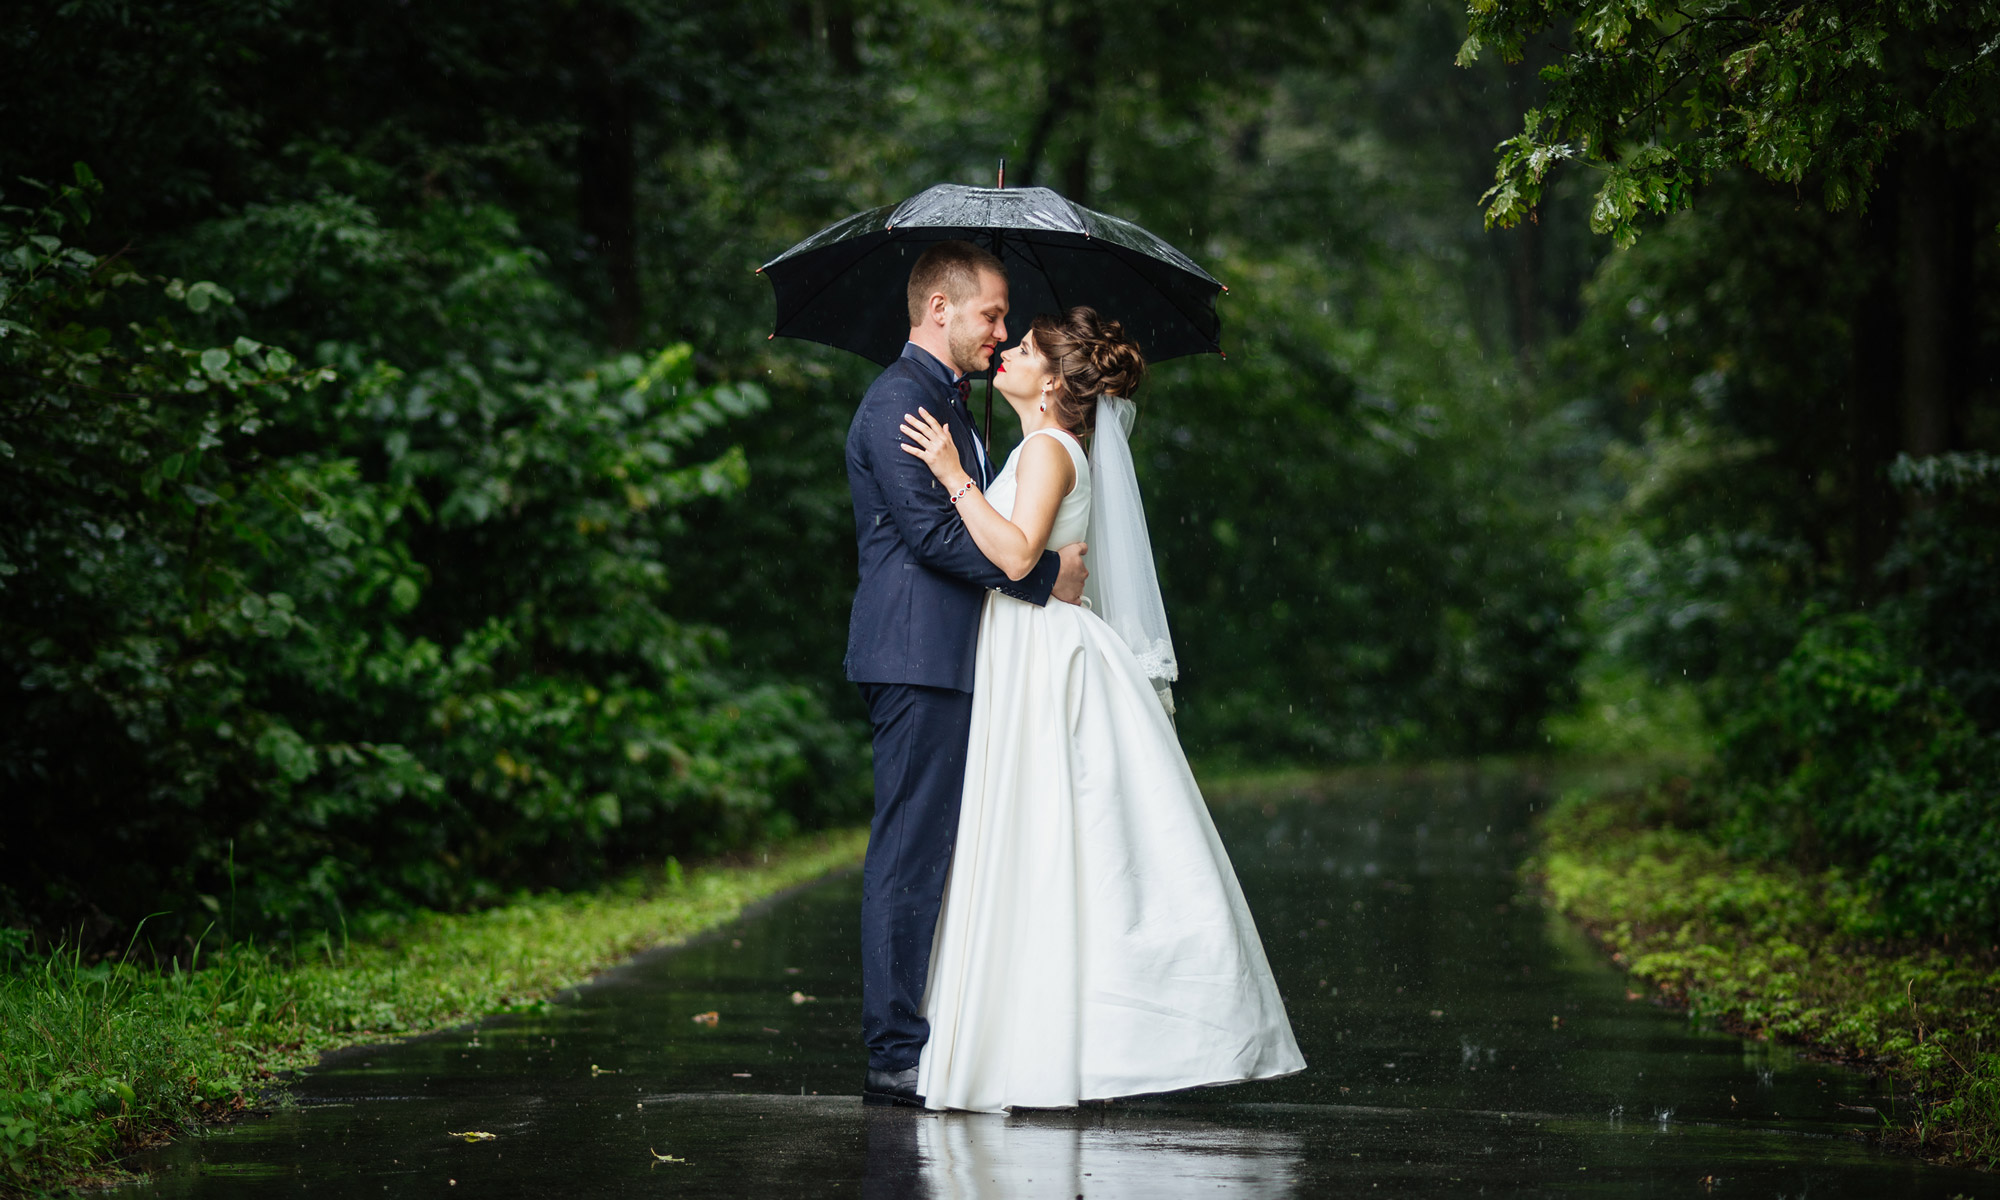 Making the Most of a Rainy Wedding Day